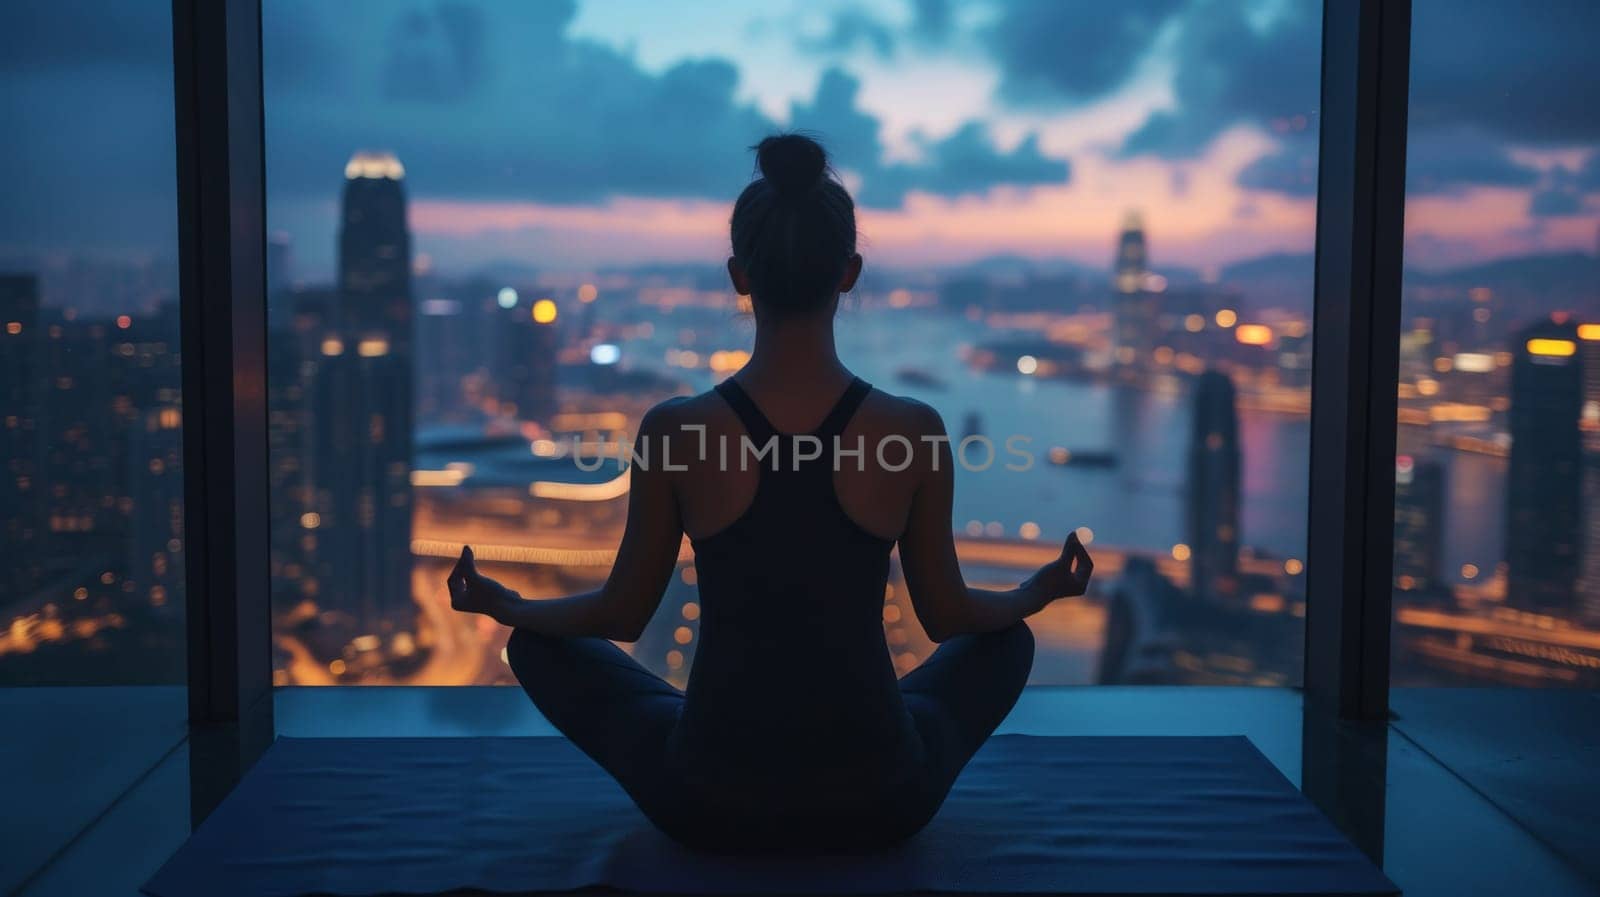 A woman sitting in lotus position with city lights behind her